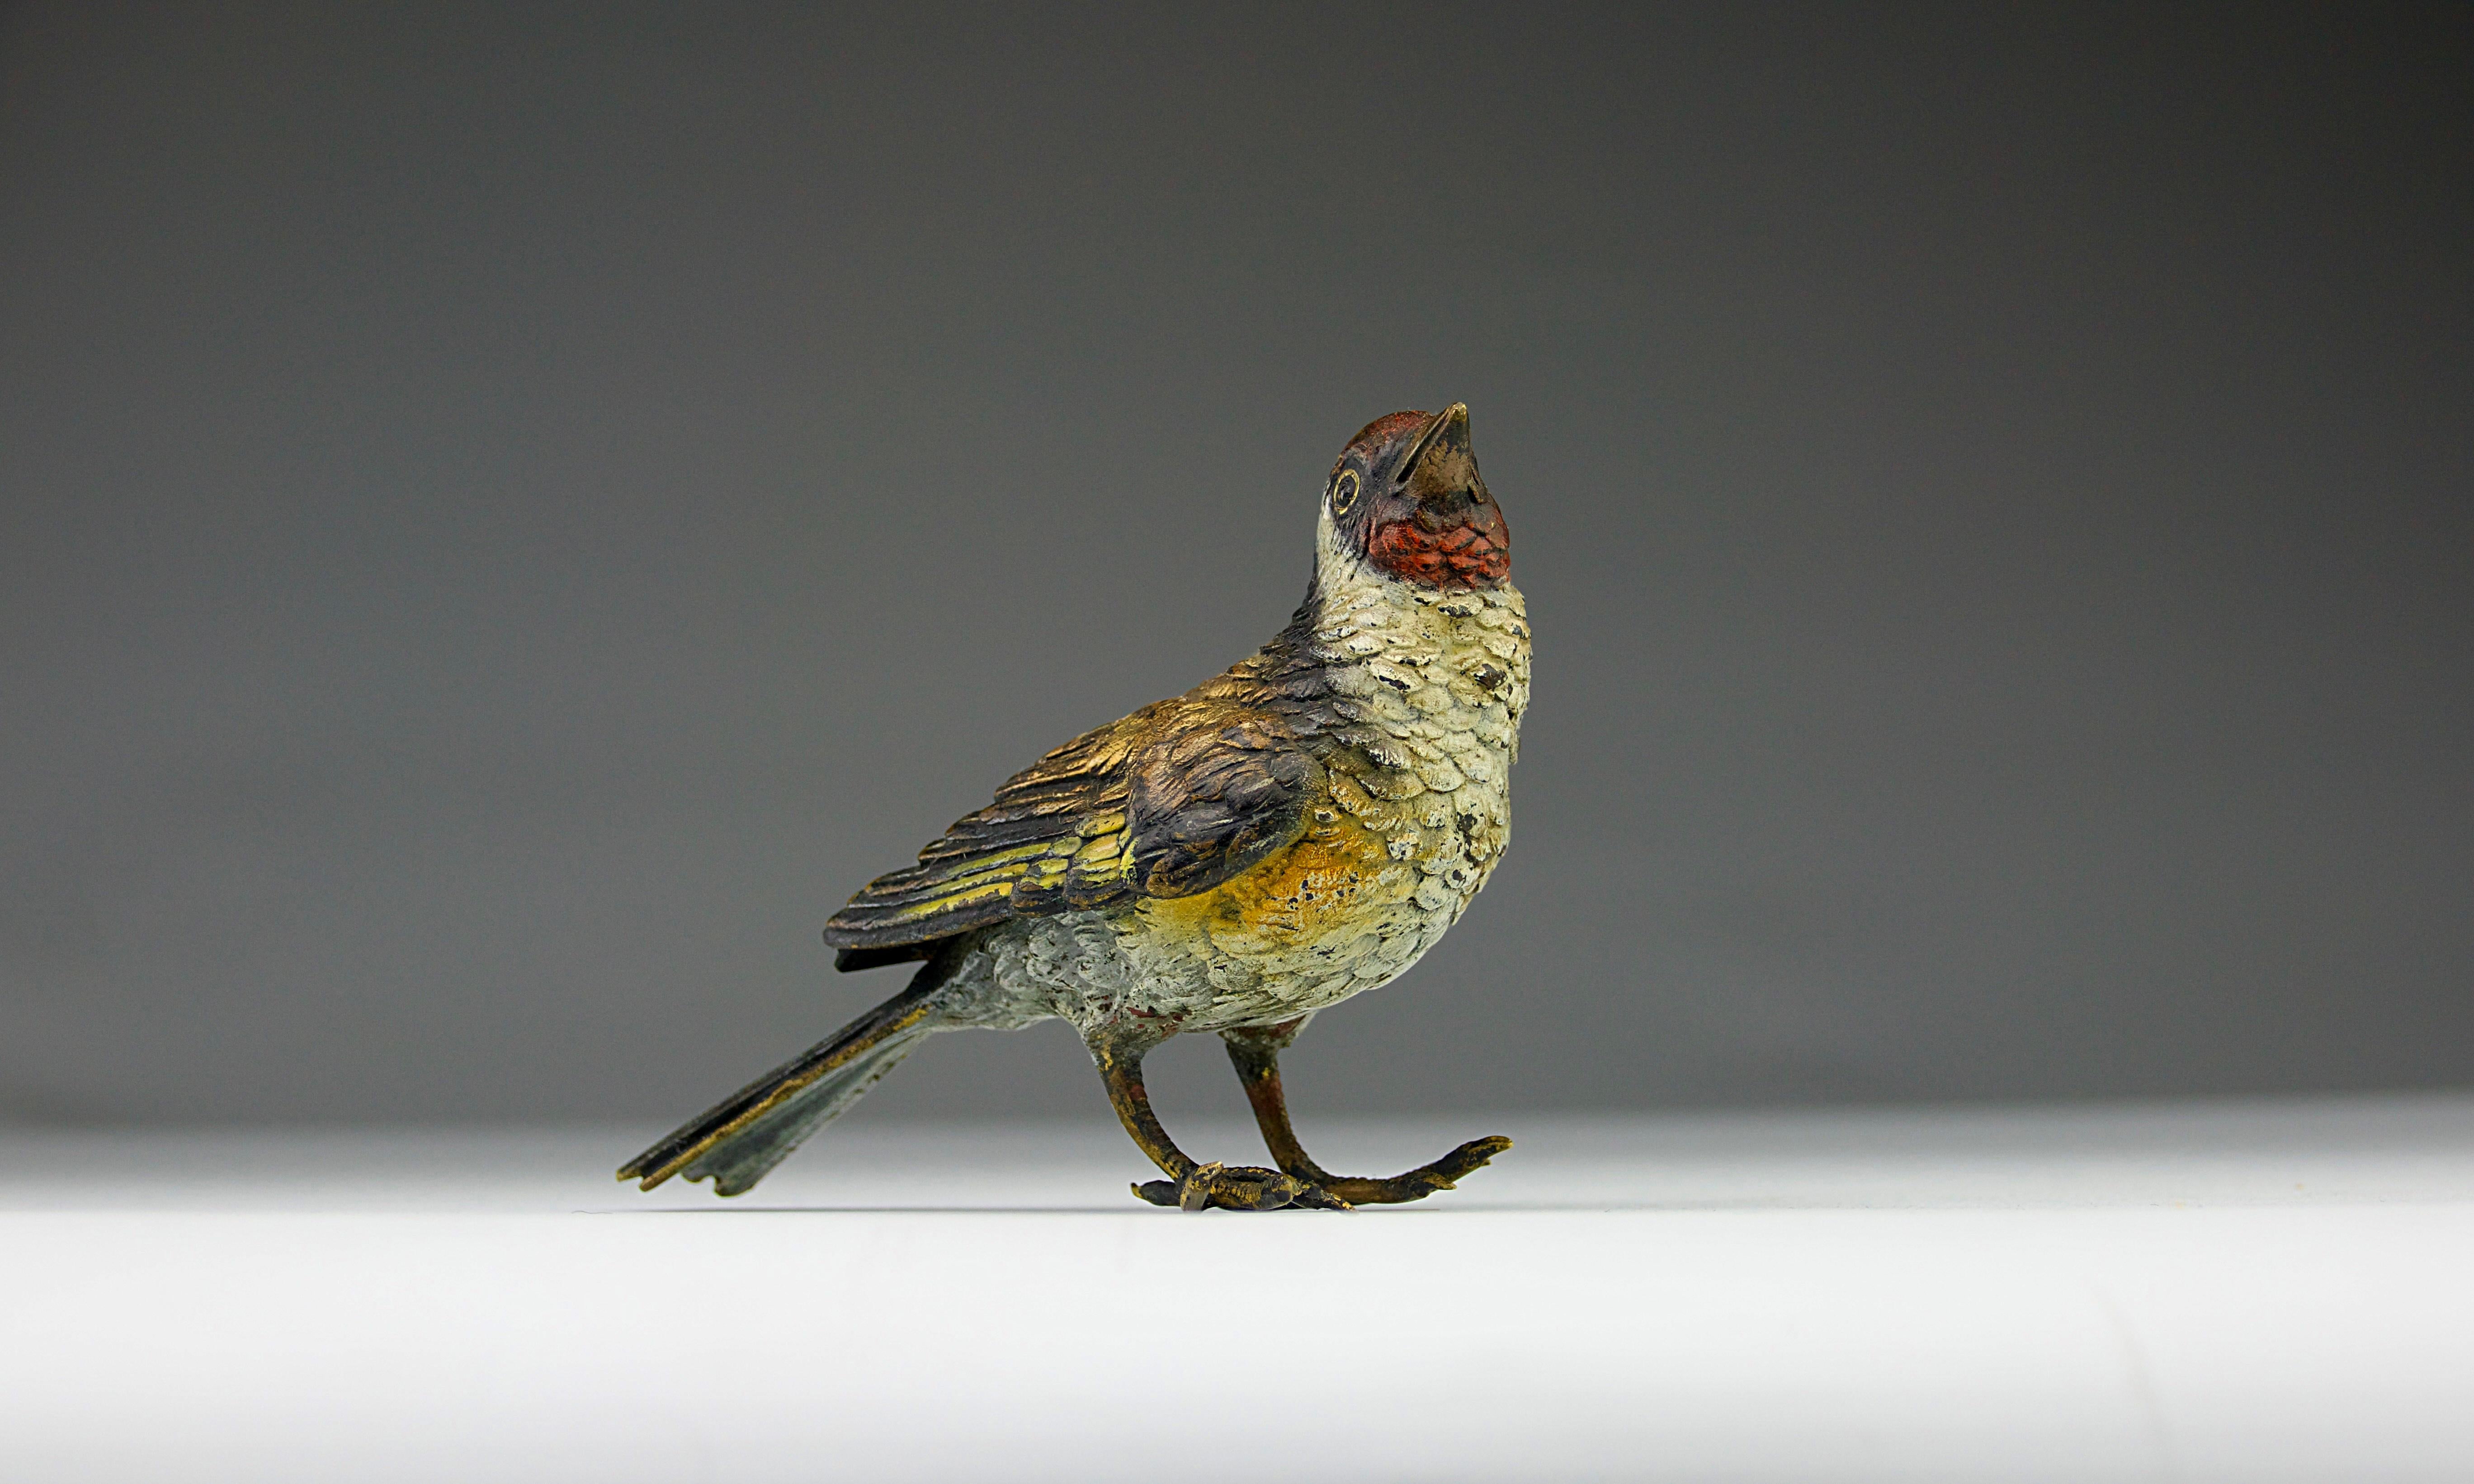 Superb red robin Vienna bronze with beautiful polychrome colours, Austria 19th century. Stamped Geschützt.

In good condition.

Dimensions in cm ( H x L x l ) : 7 x 11 x 4

Secure shipping.